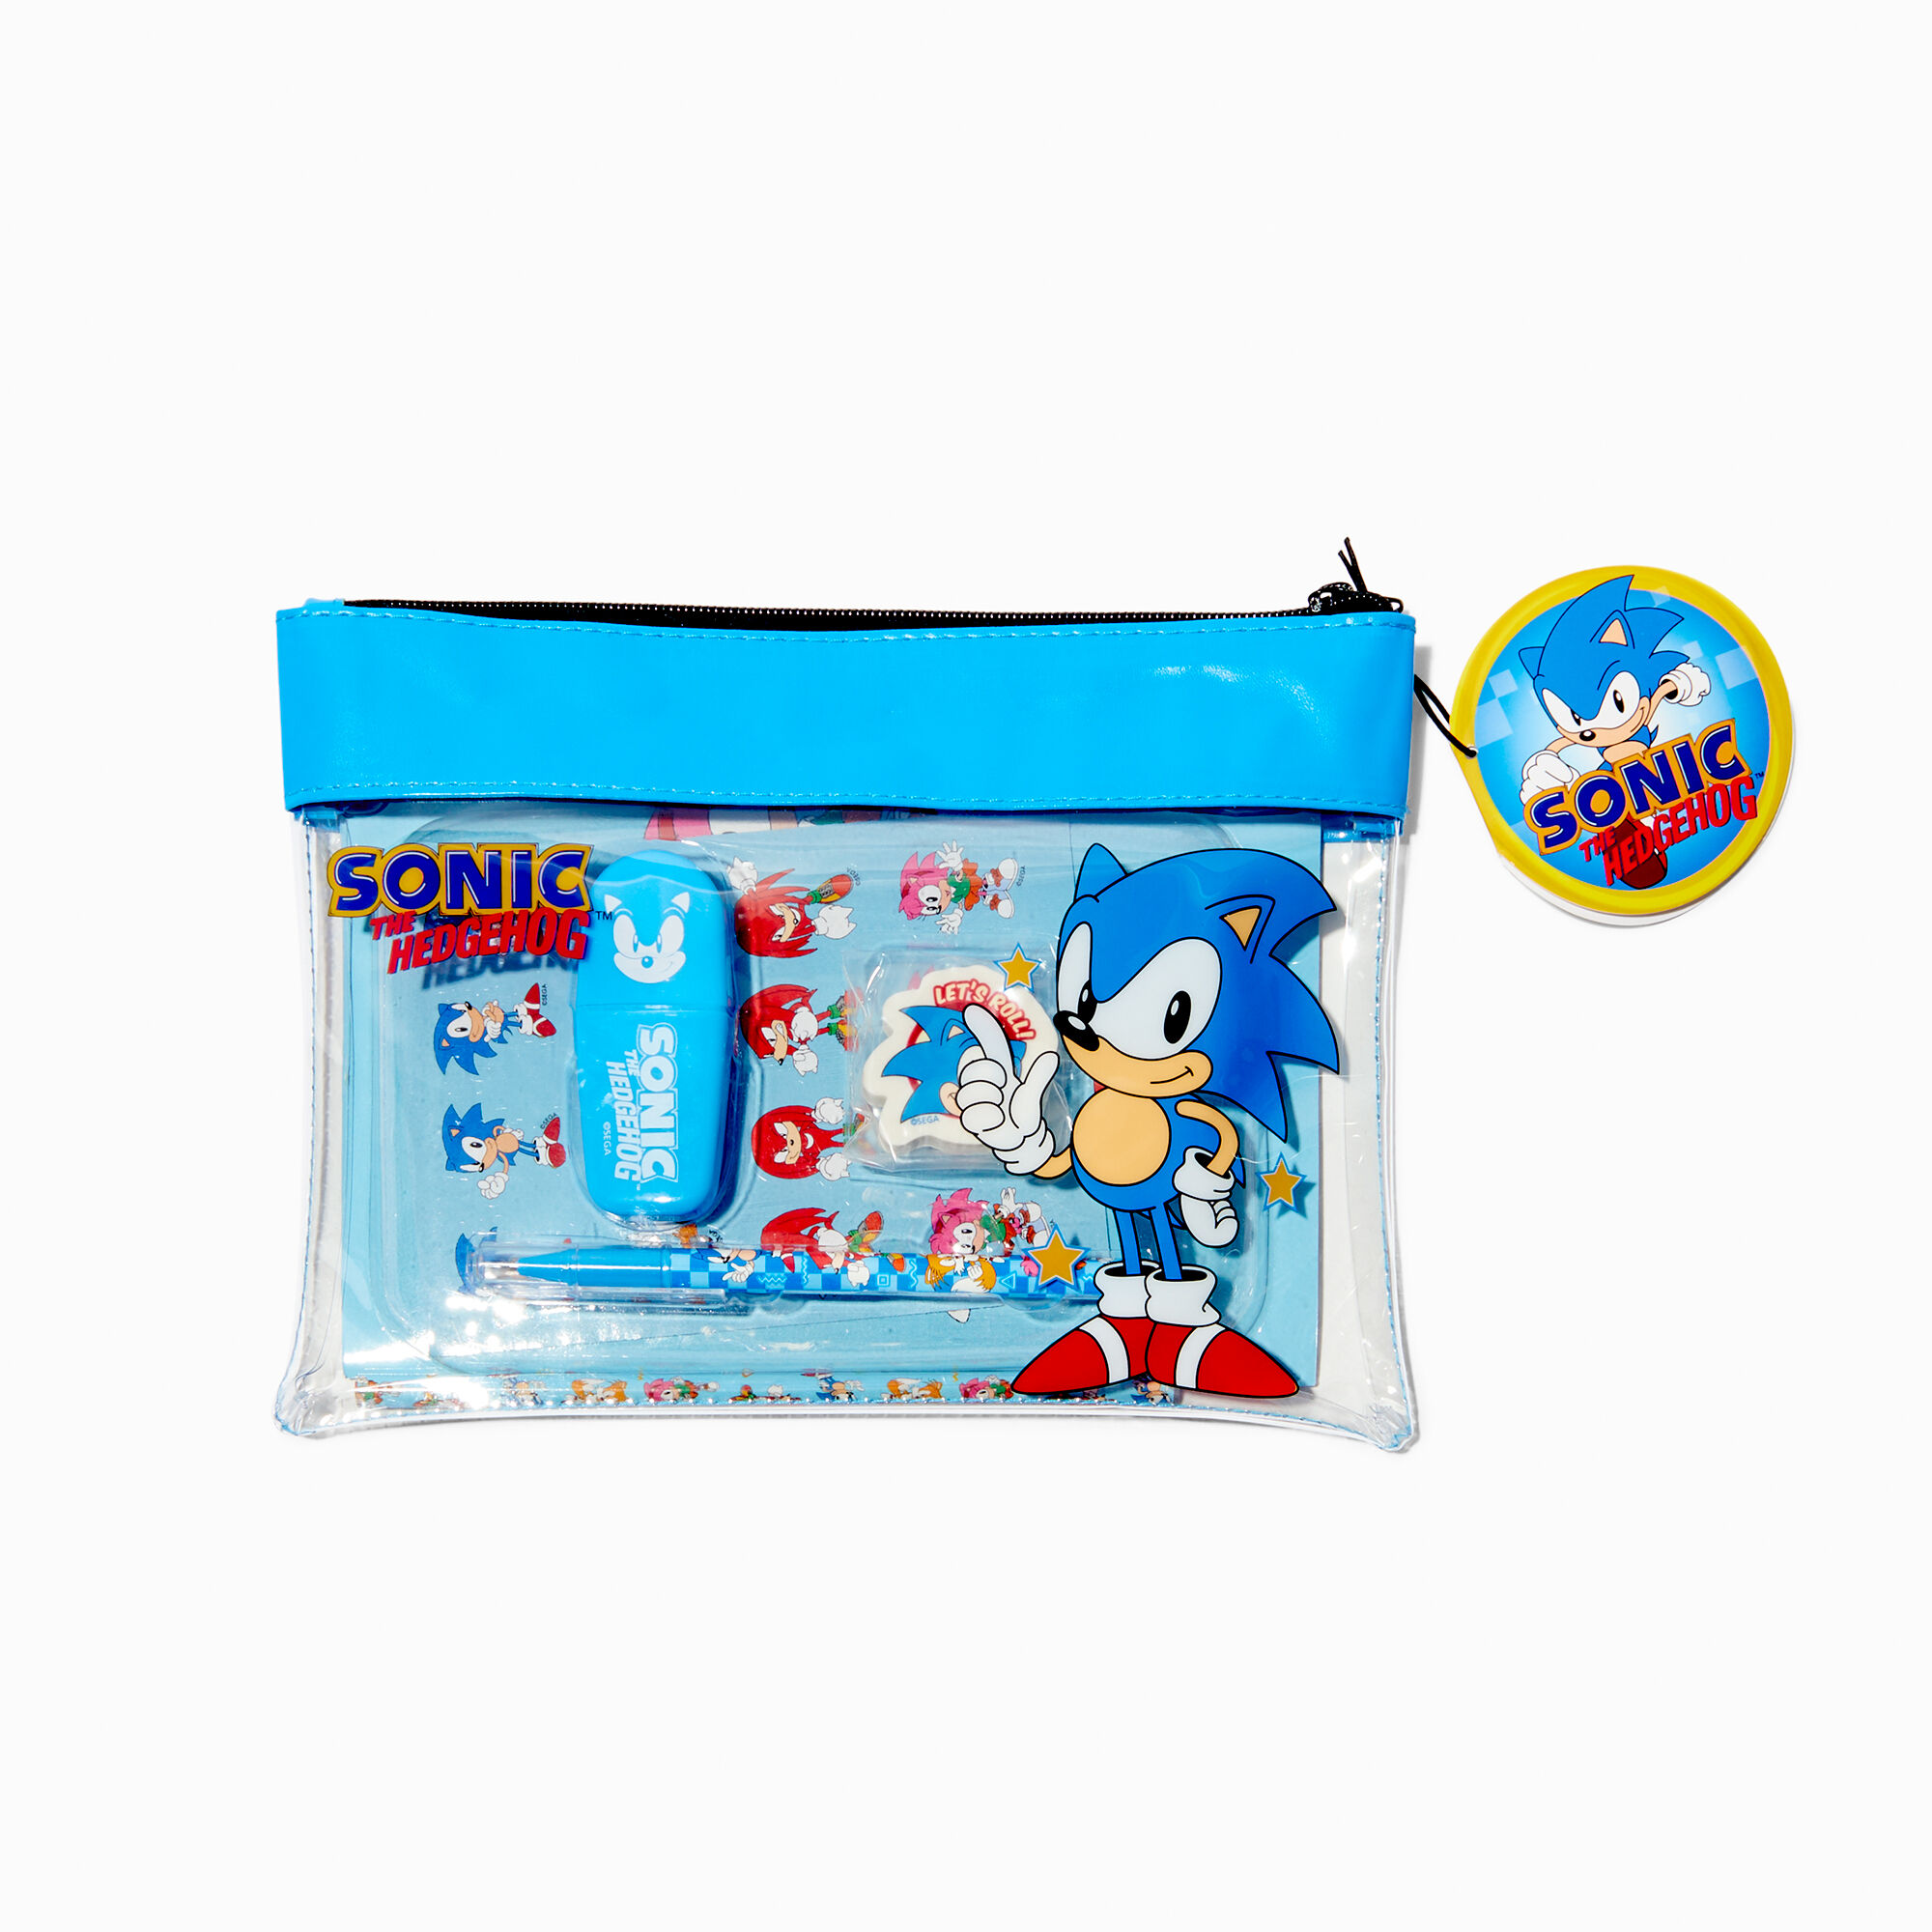 View Claires Sonic Stationery Set 6 Pack information